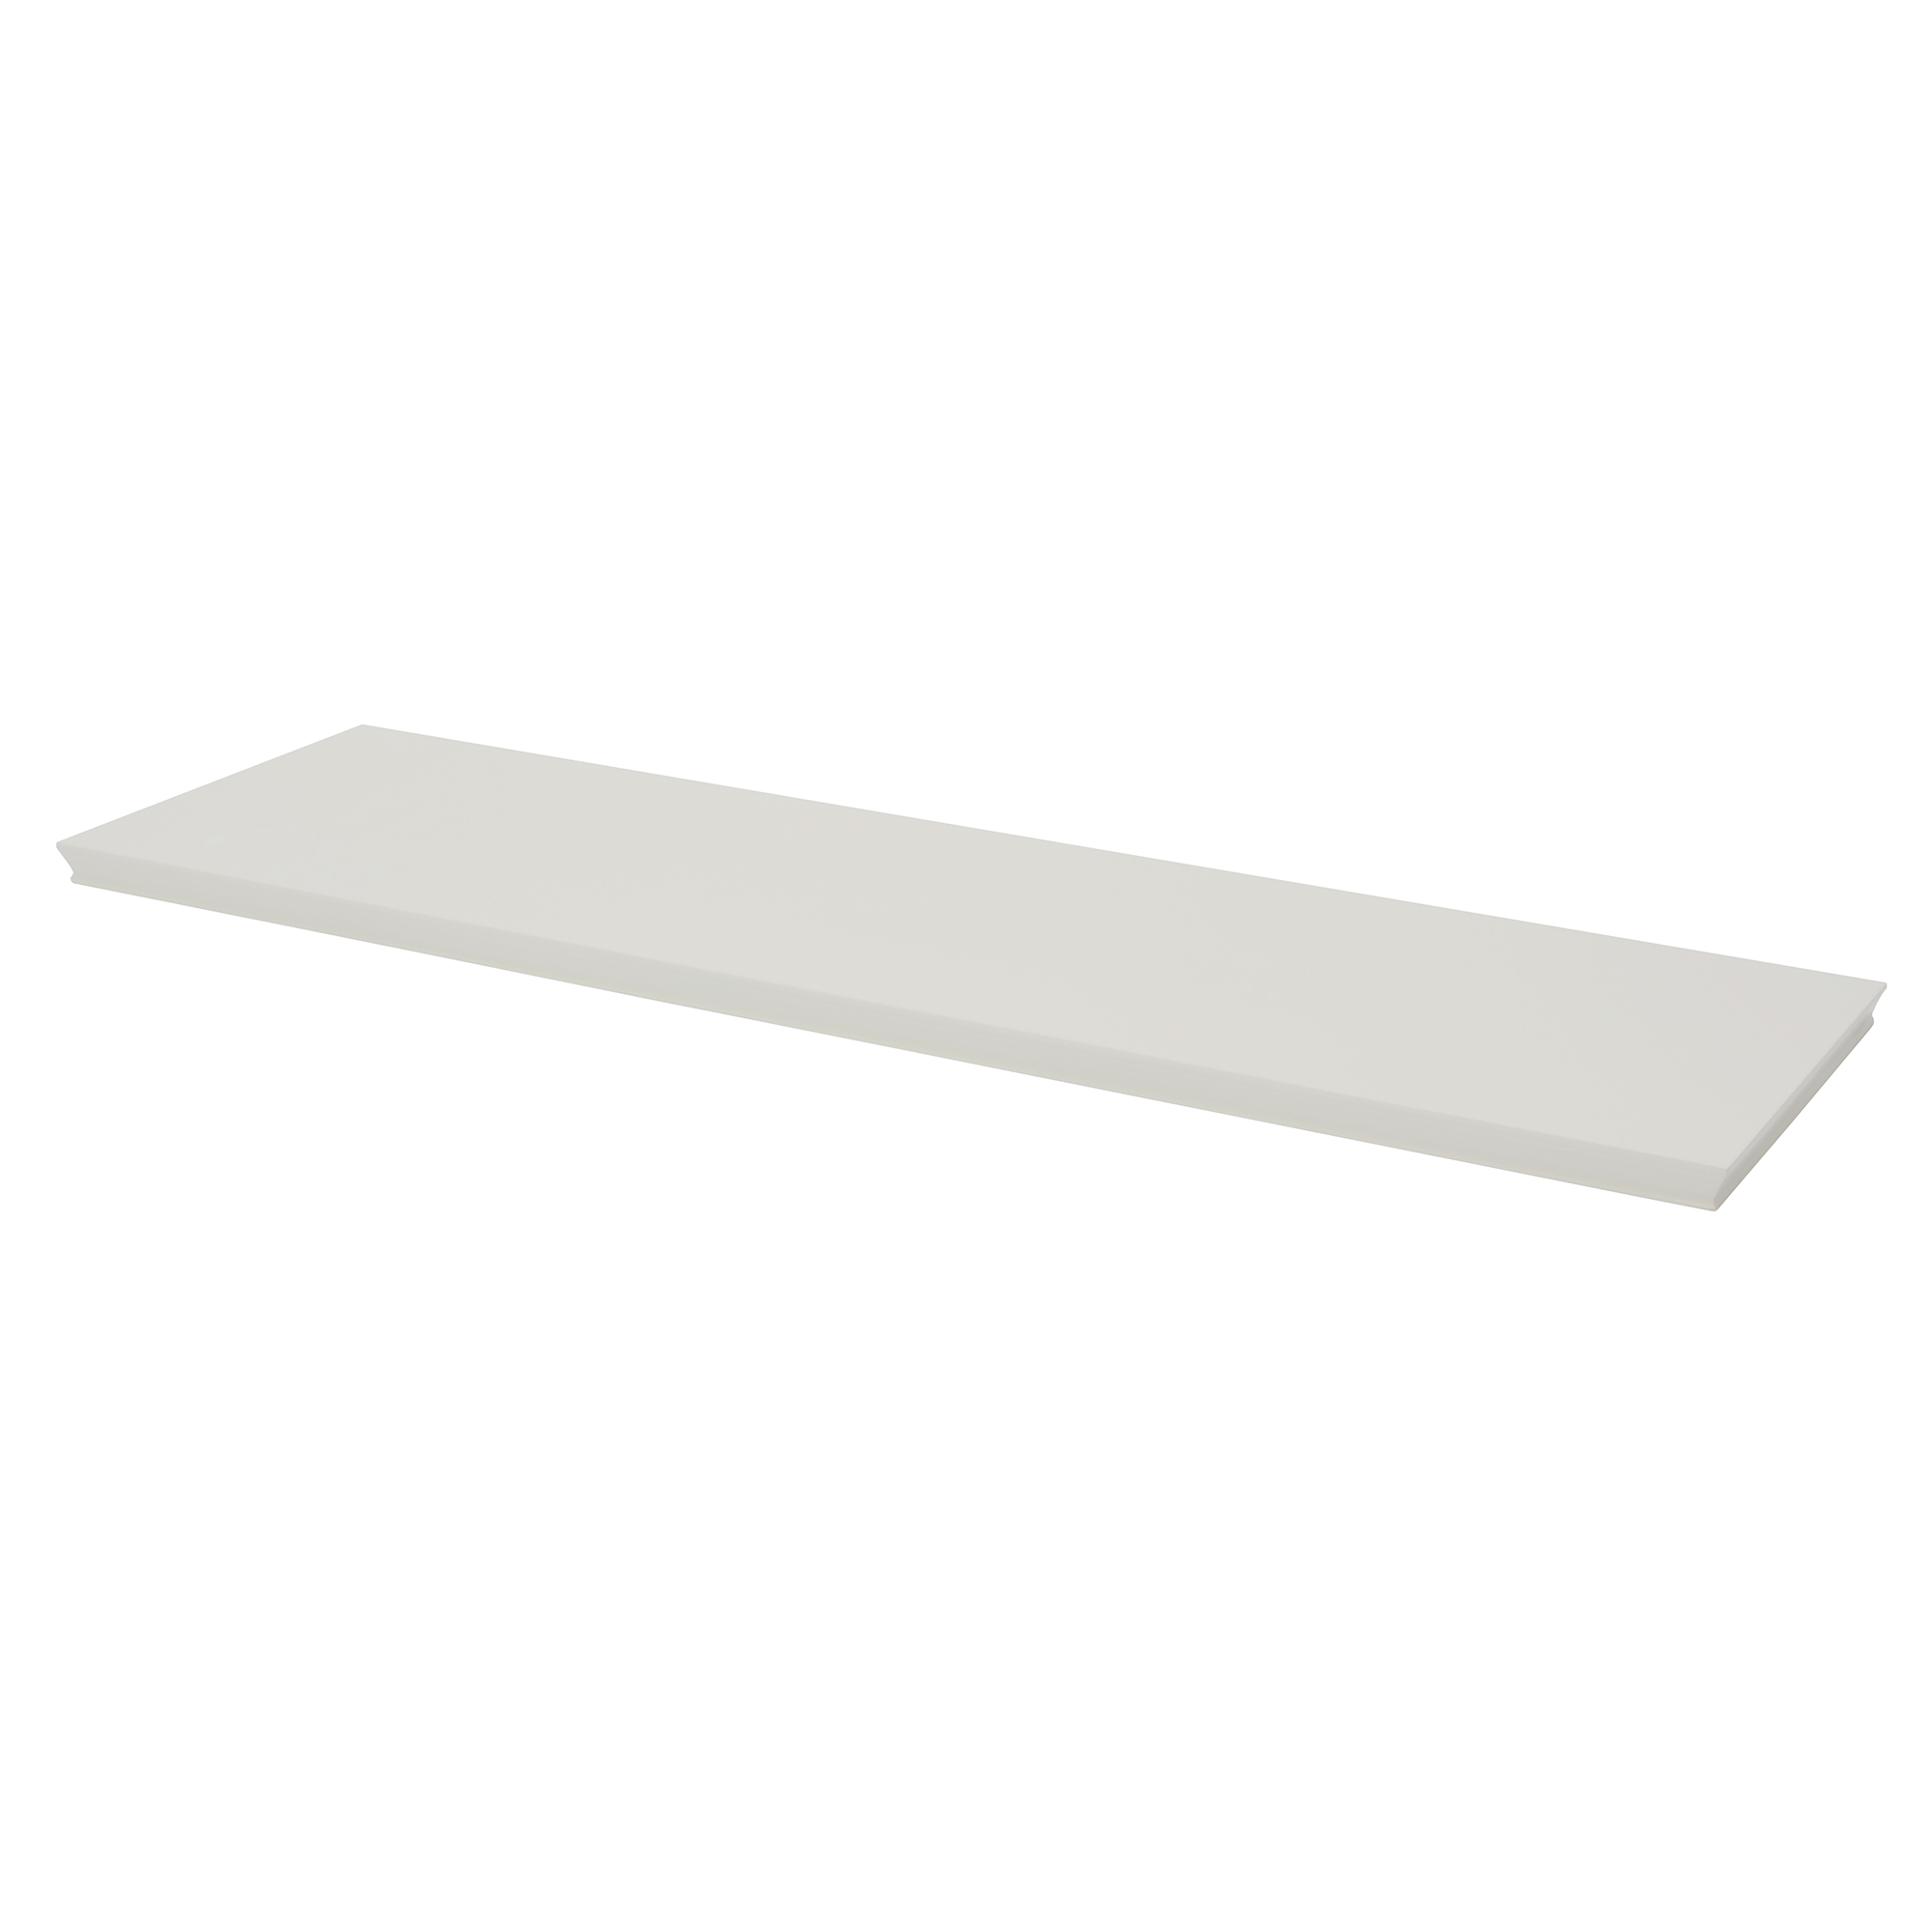 Pekodom Provence Old White Gloss Floating Shelf 800 x 235 x 20mm RRP £10.99 CLEARANCE XL £3